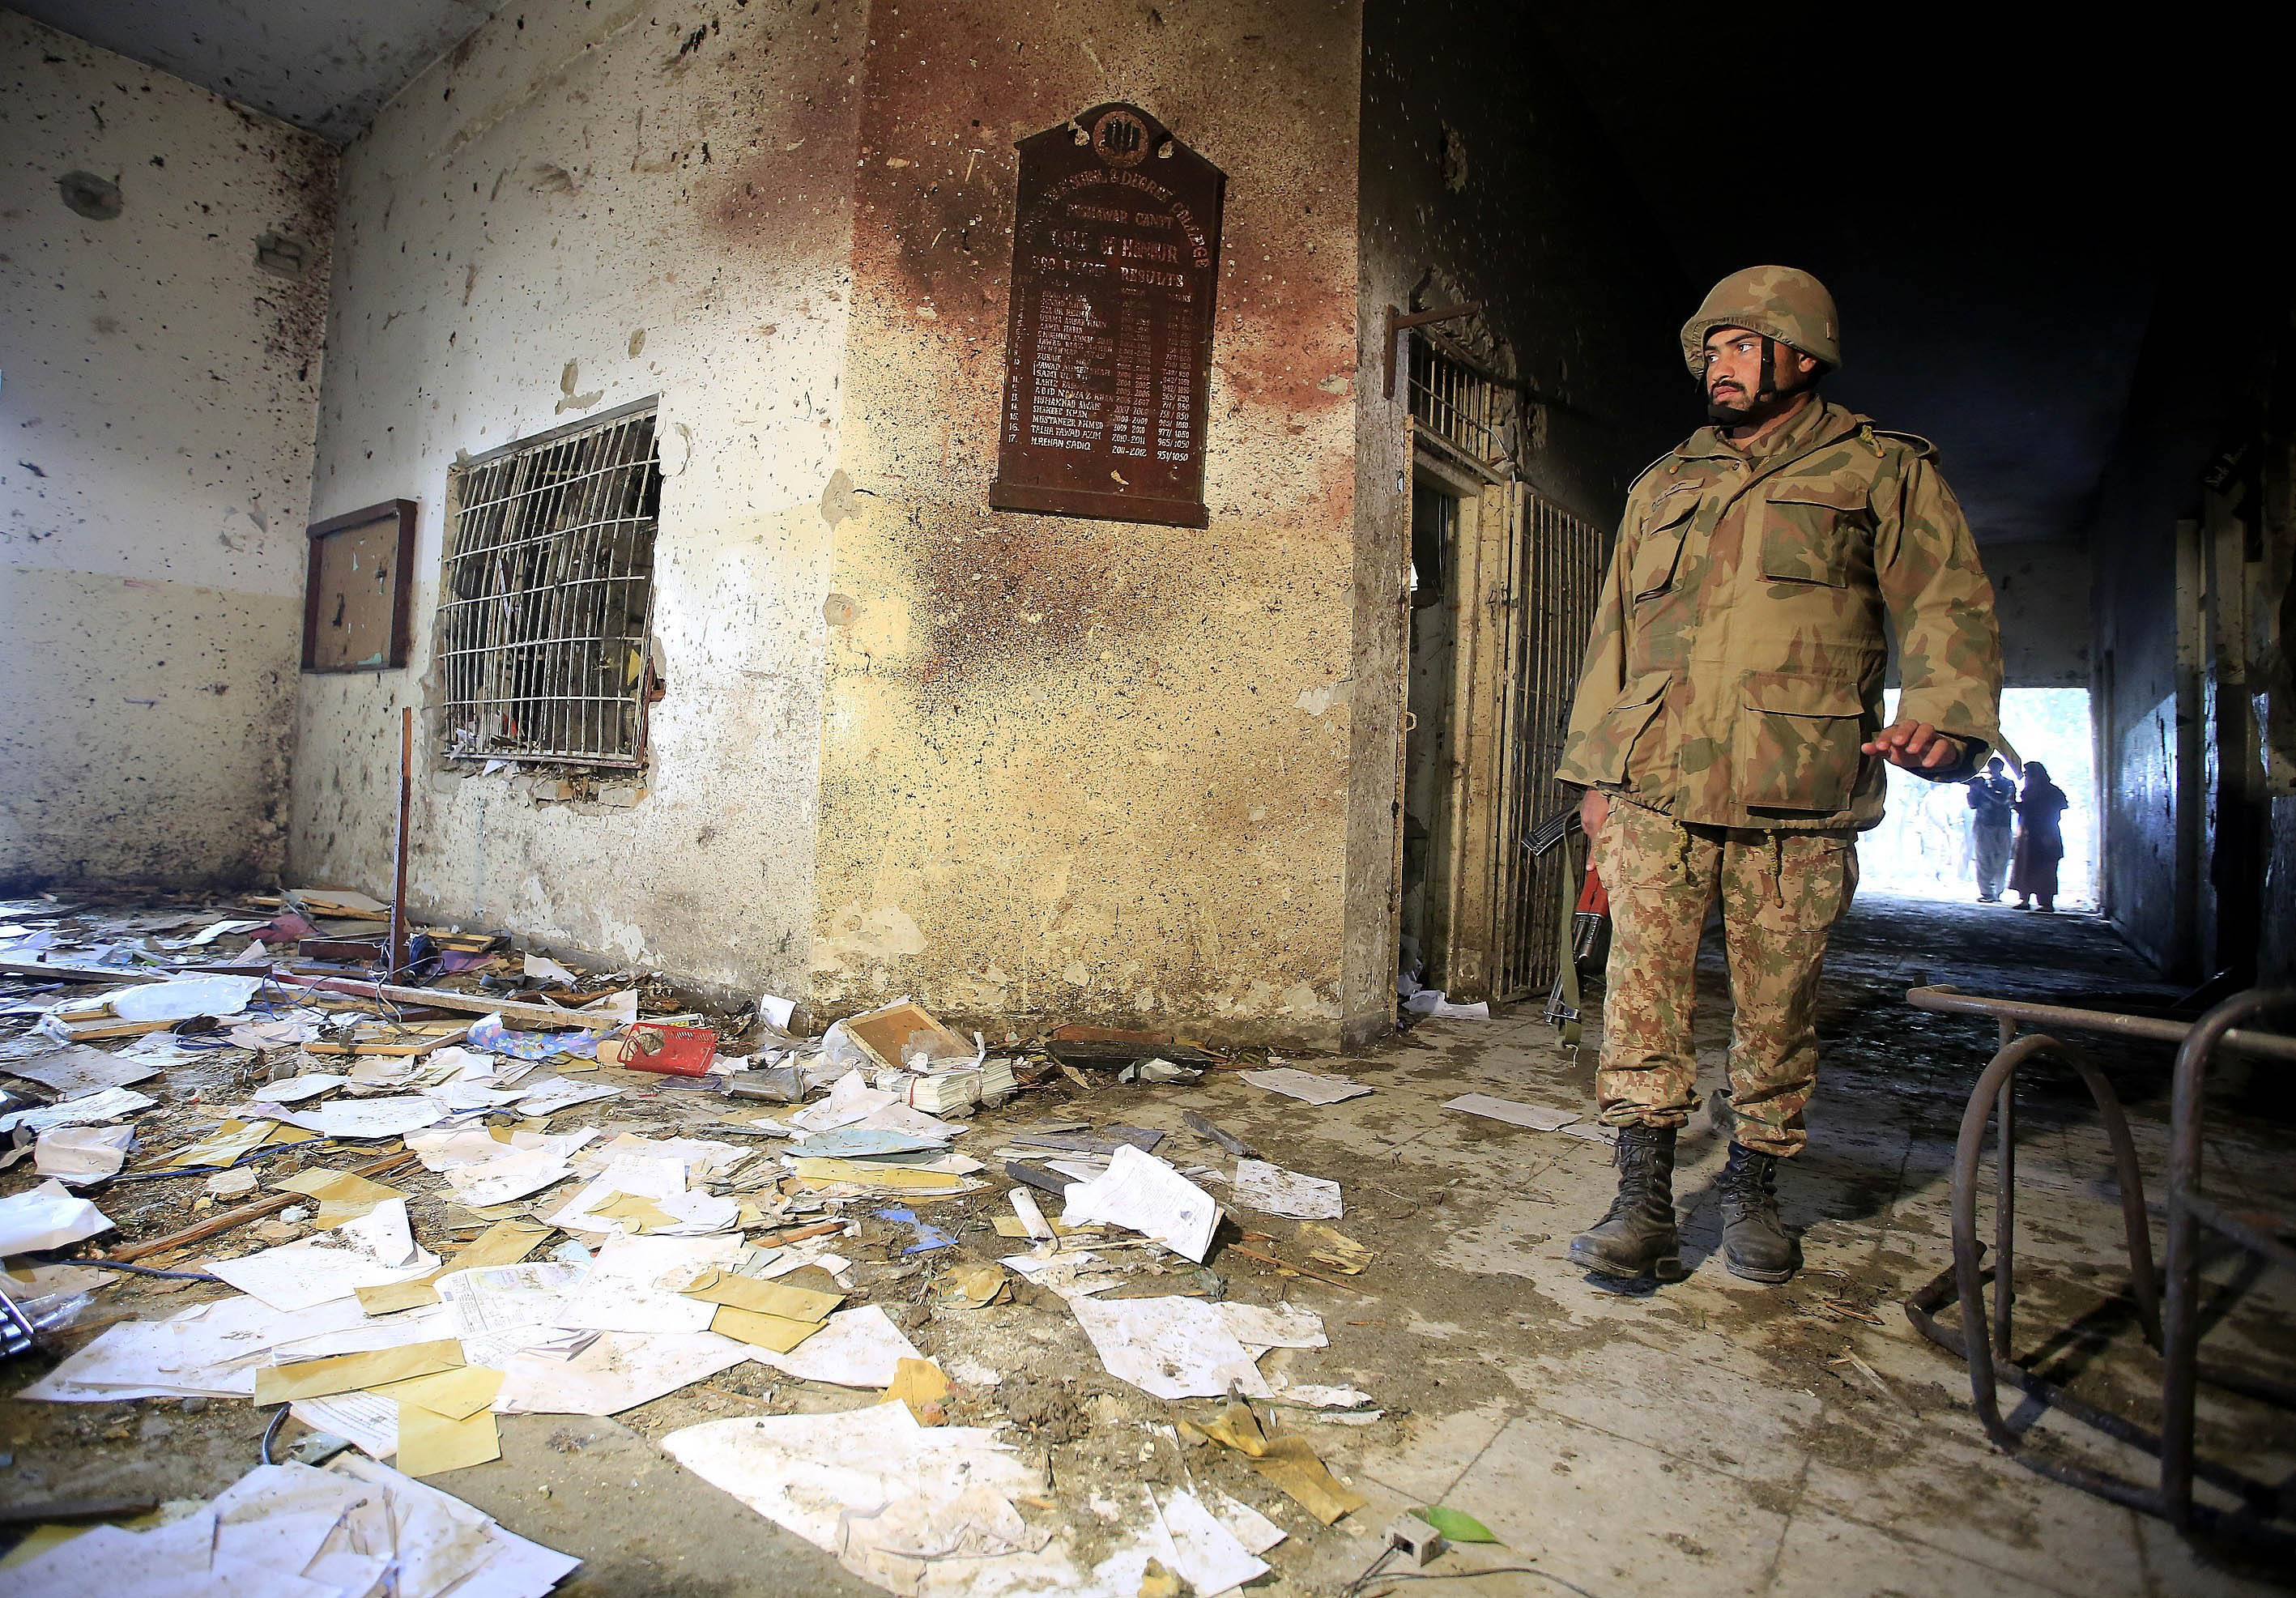 A view of the debris of the army-run school that was attacked by Taliban on Tuesday, in northwestern city of Peshawar, Pakistan, on December 17, 2014. (Anadolu Agency—2014 Anadolu Agency)